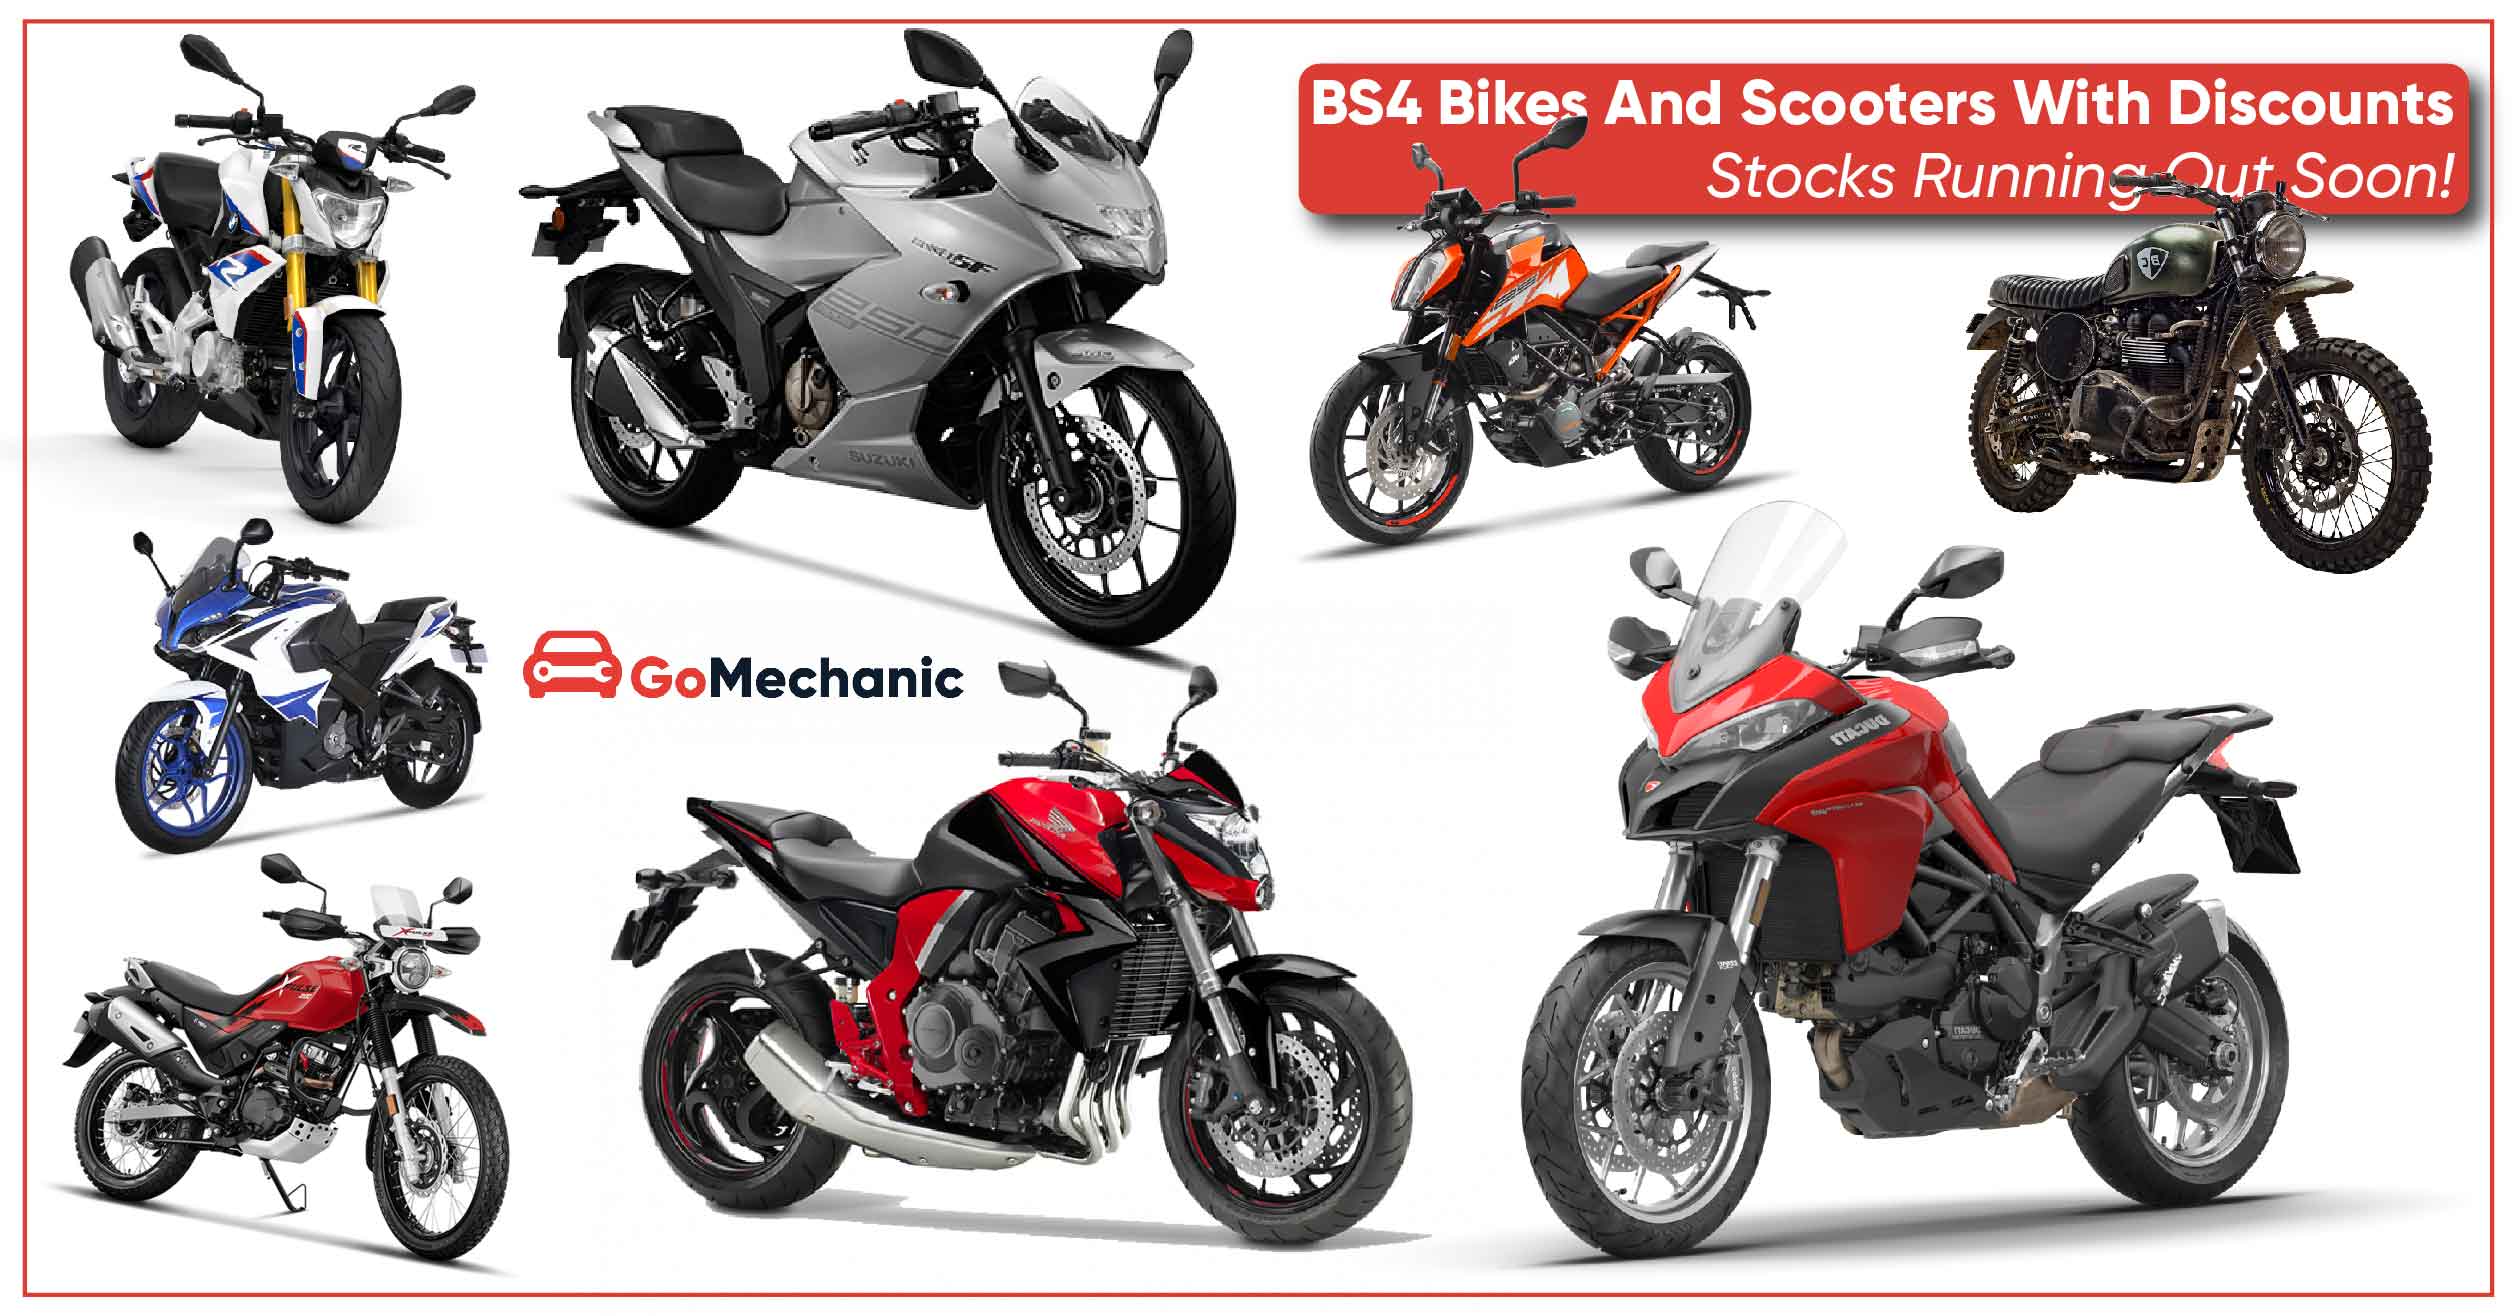 31 Bs4 Bikes And Scooters With Discounts Stocks Running Out Soon